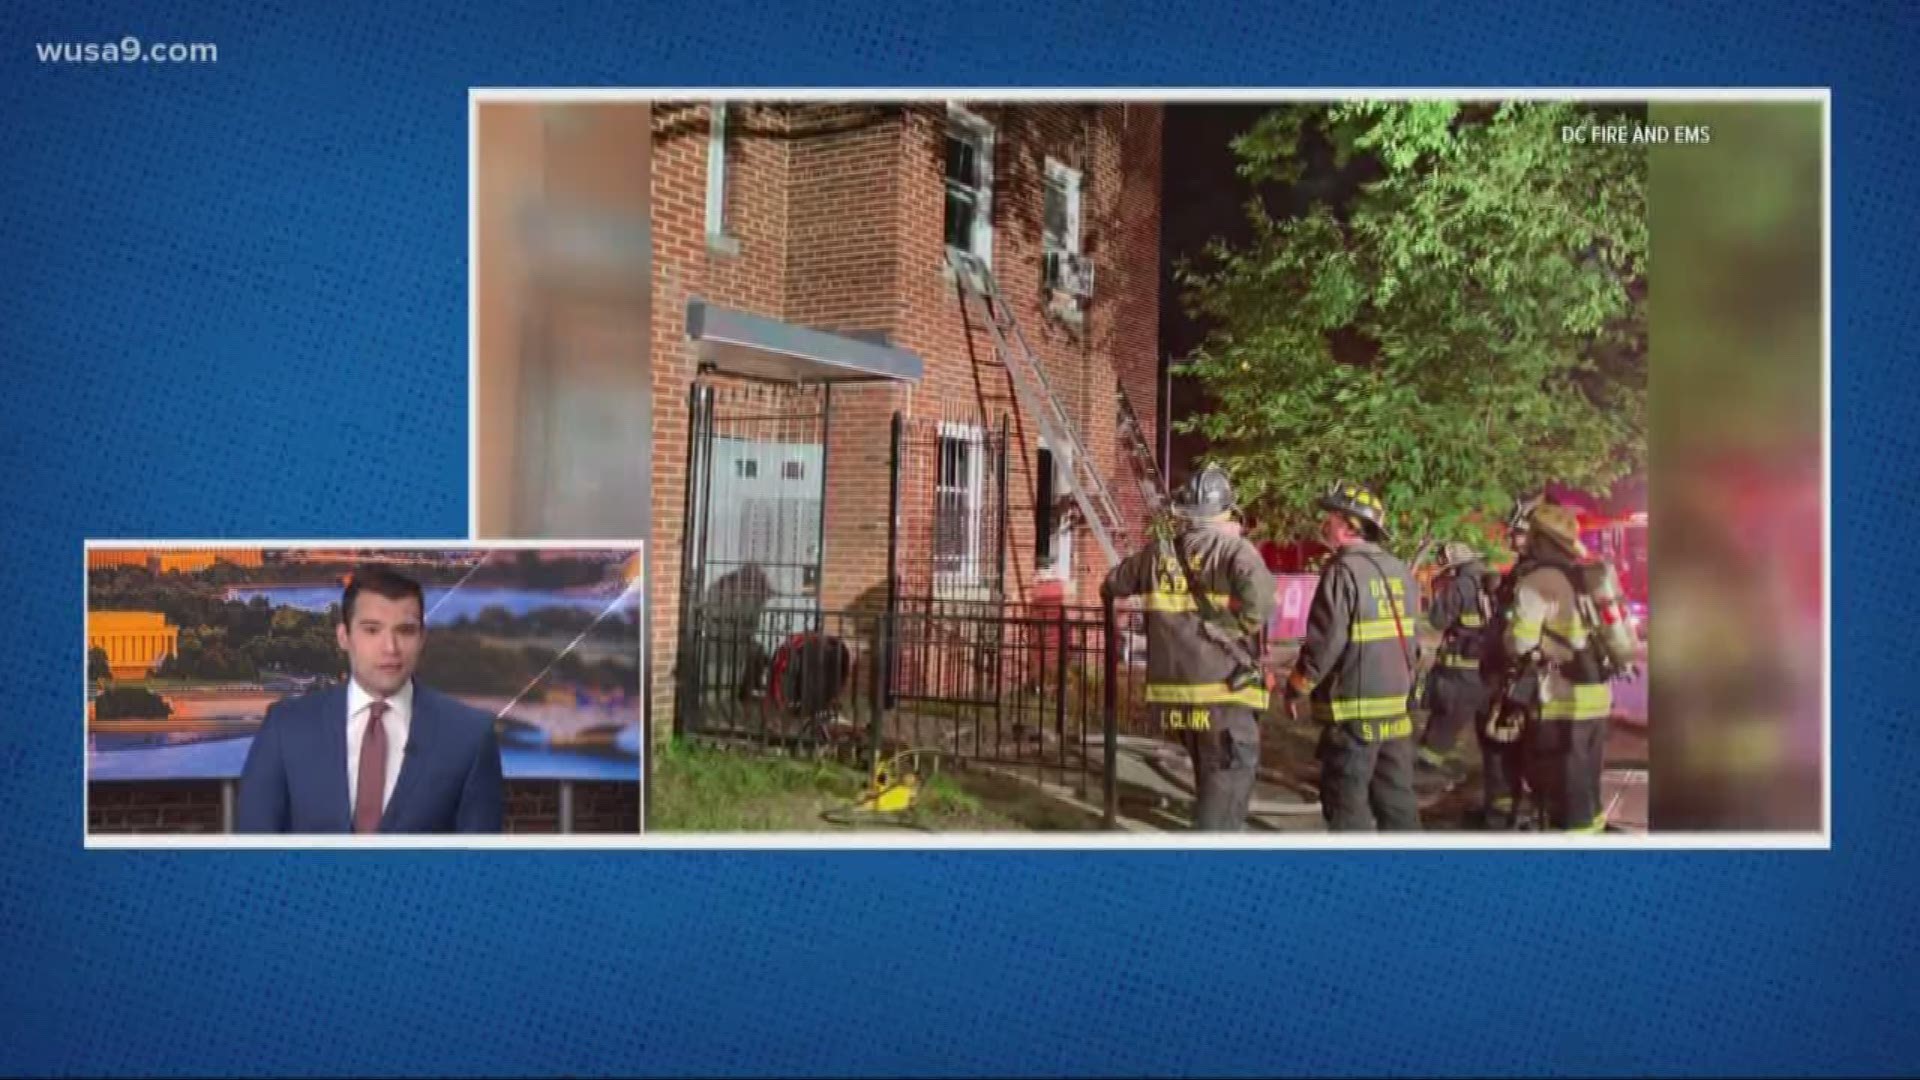 Six adults and four children were rescued from an apartment fire early Friday morning.